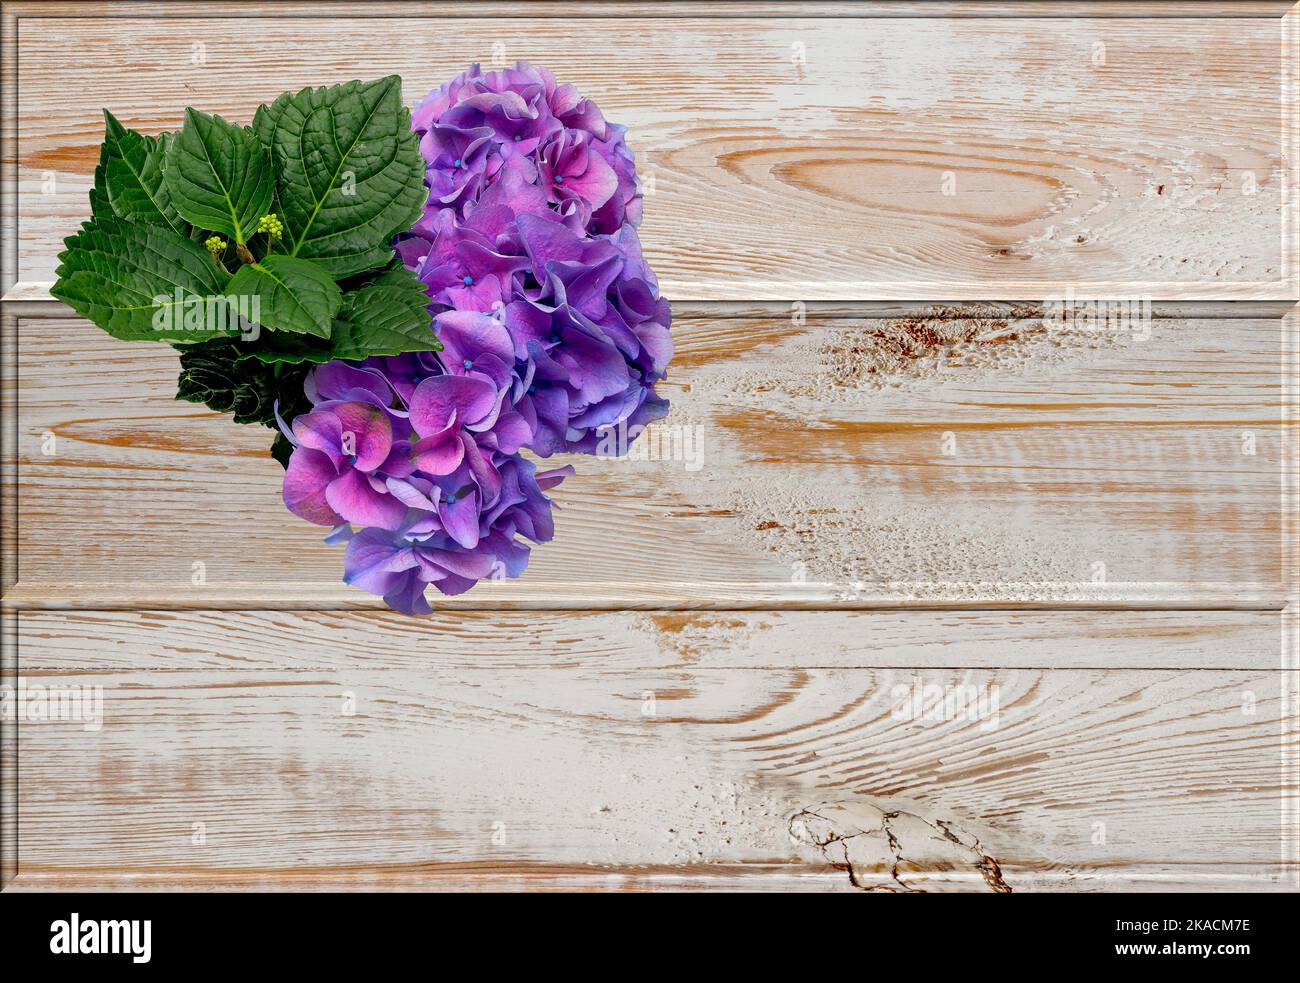 Purple hydrangea flower on pine boards background, natural old wood in rustic style, background for graphic designs, space for text, flat lay Stock Photo